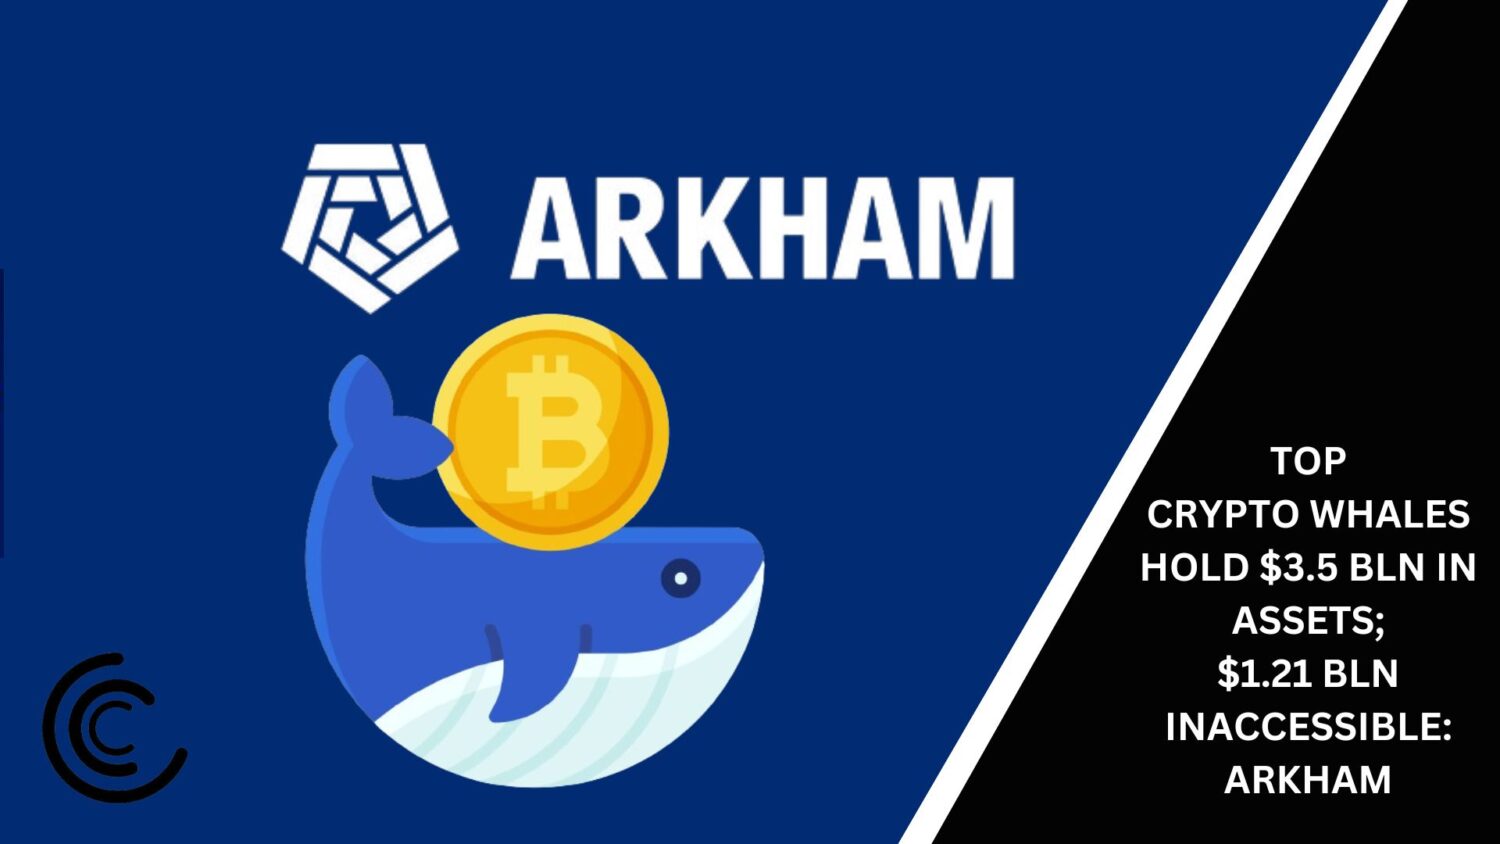 Top Crypto Whales Hold $3.5 Billion In Assets; $1.21 Billion Inaccessible:arkham